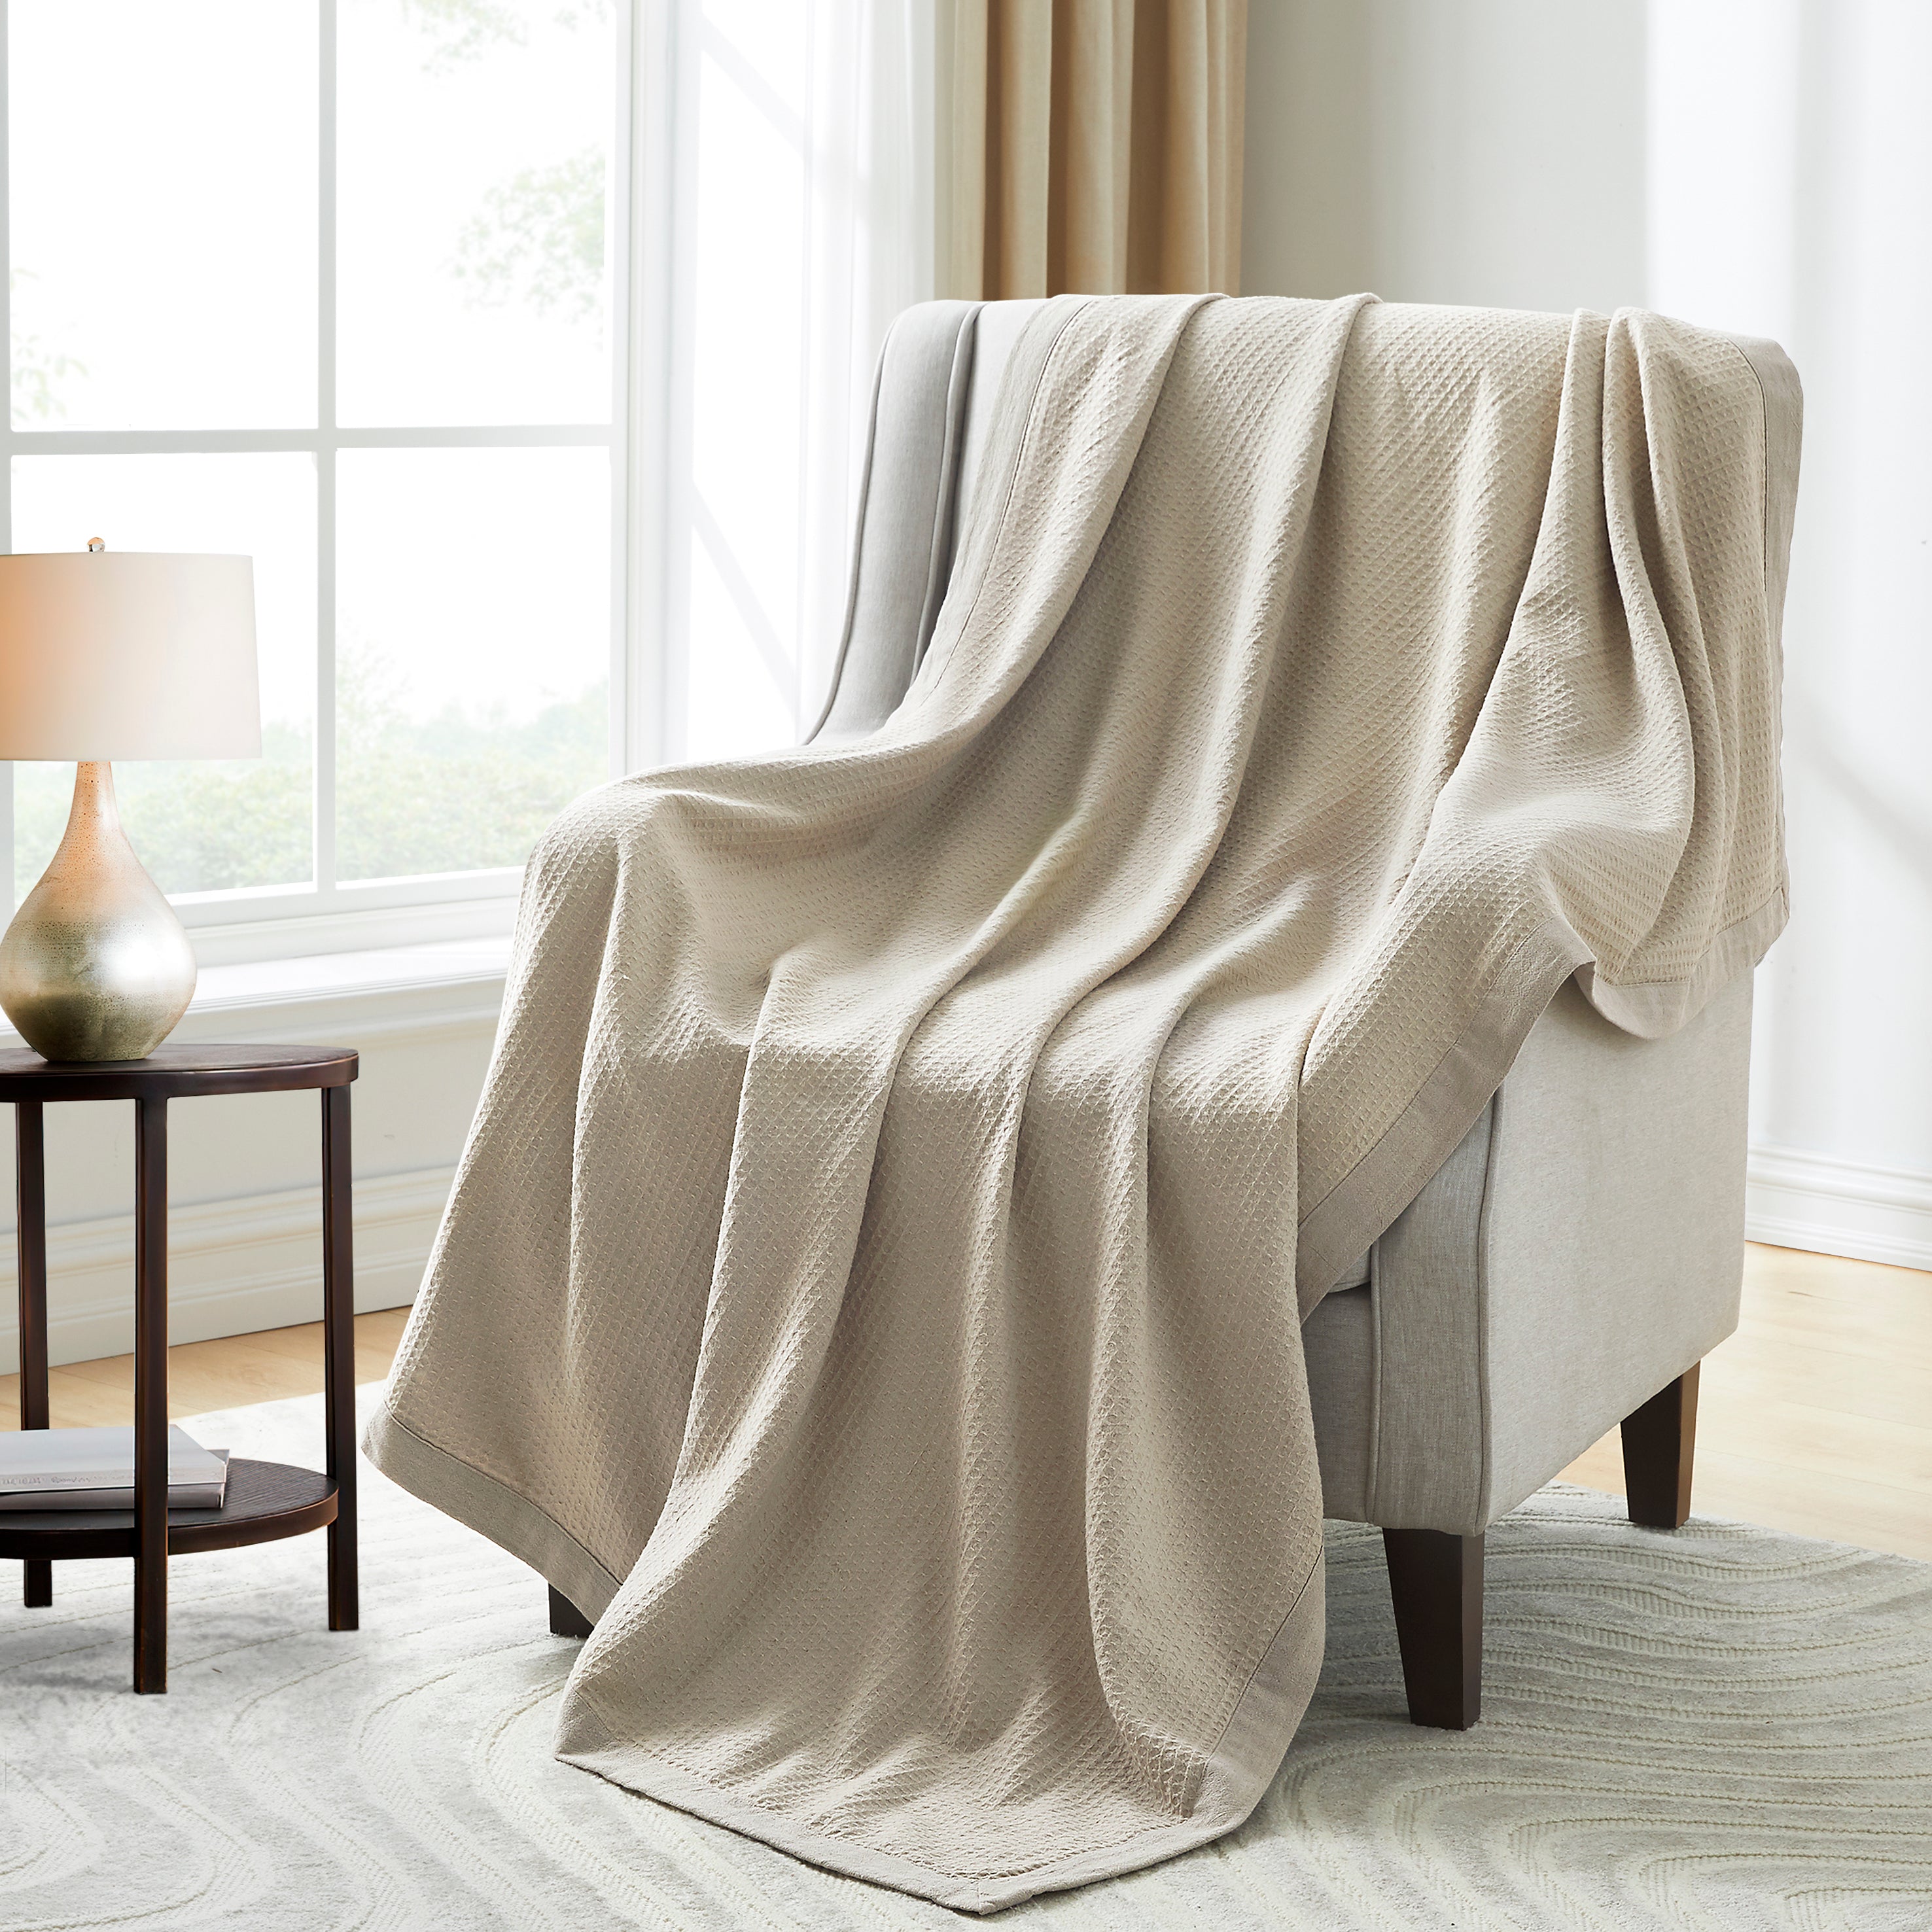 55% Linen 45% Cotton Waffle Throw Blanket 50 X 70 Inches, Natural